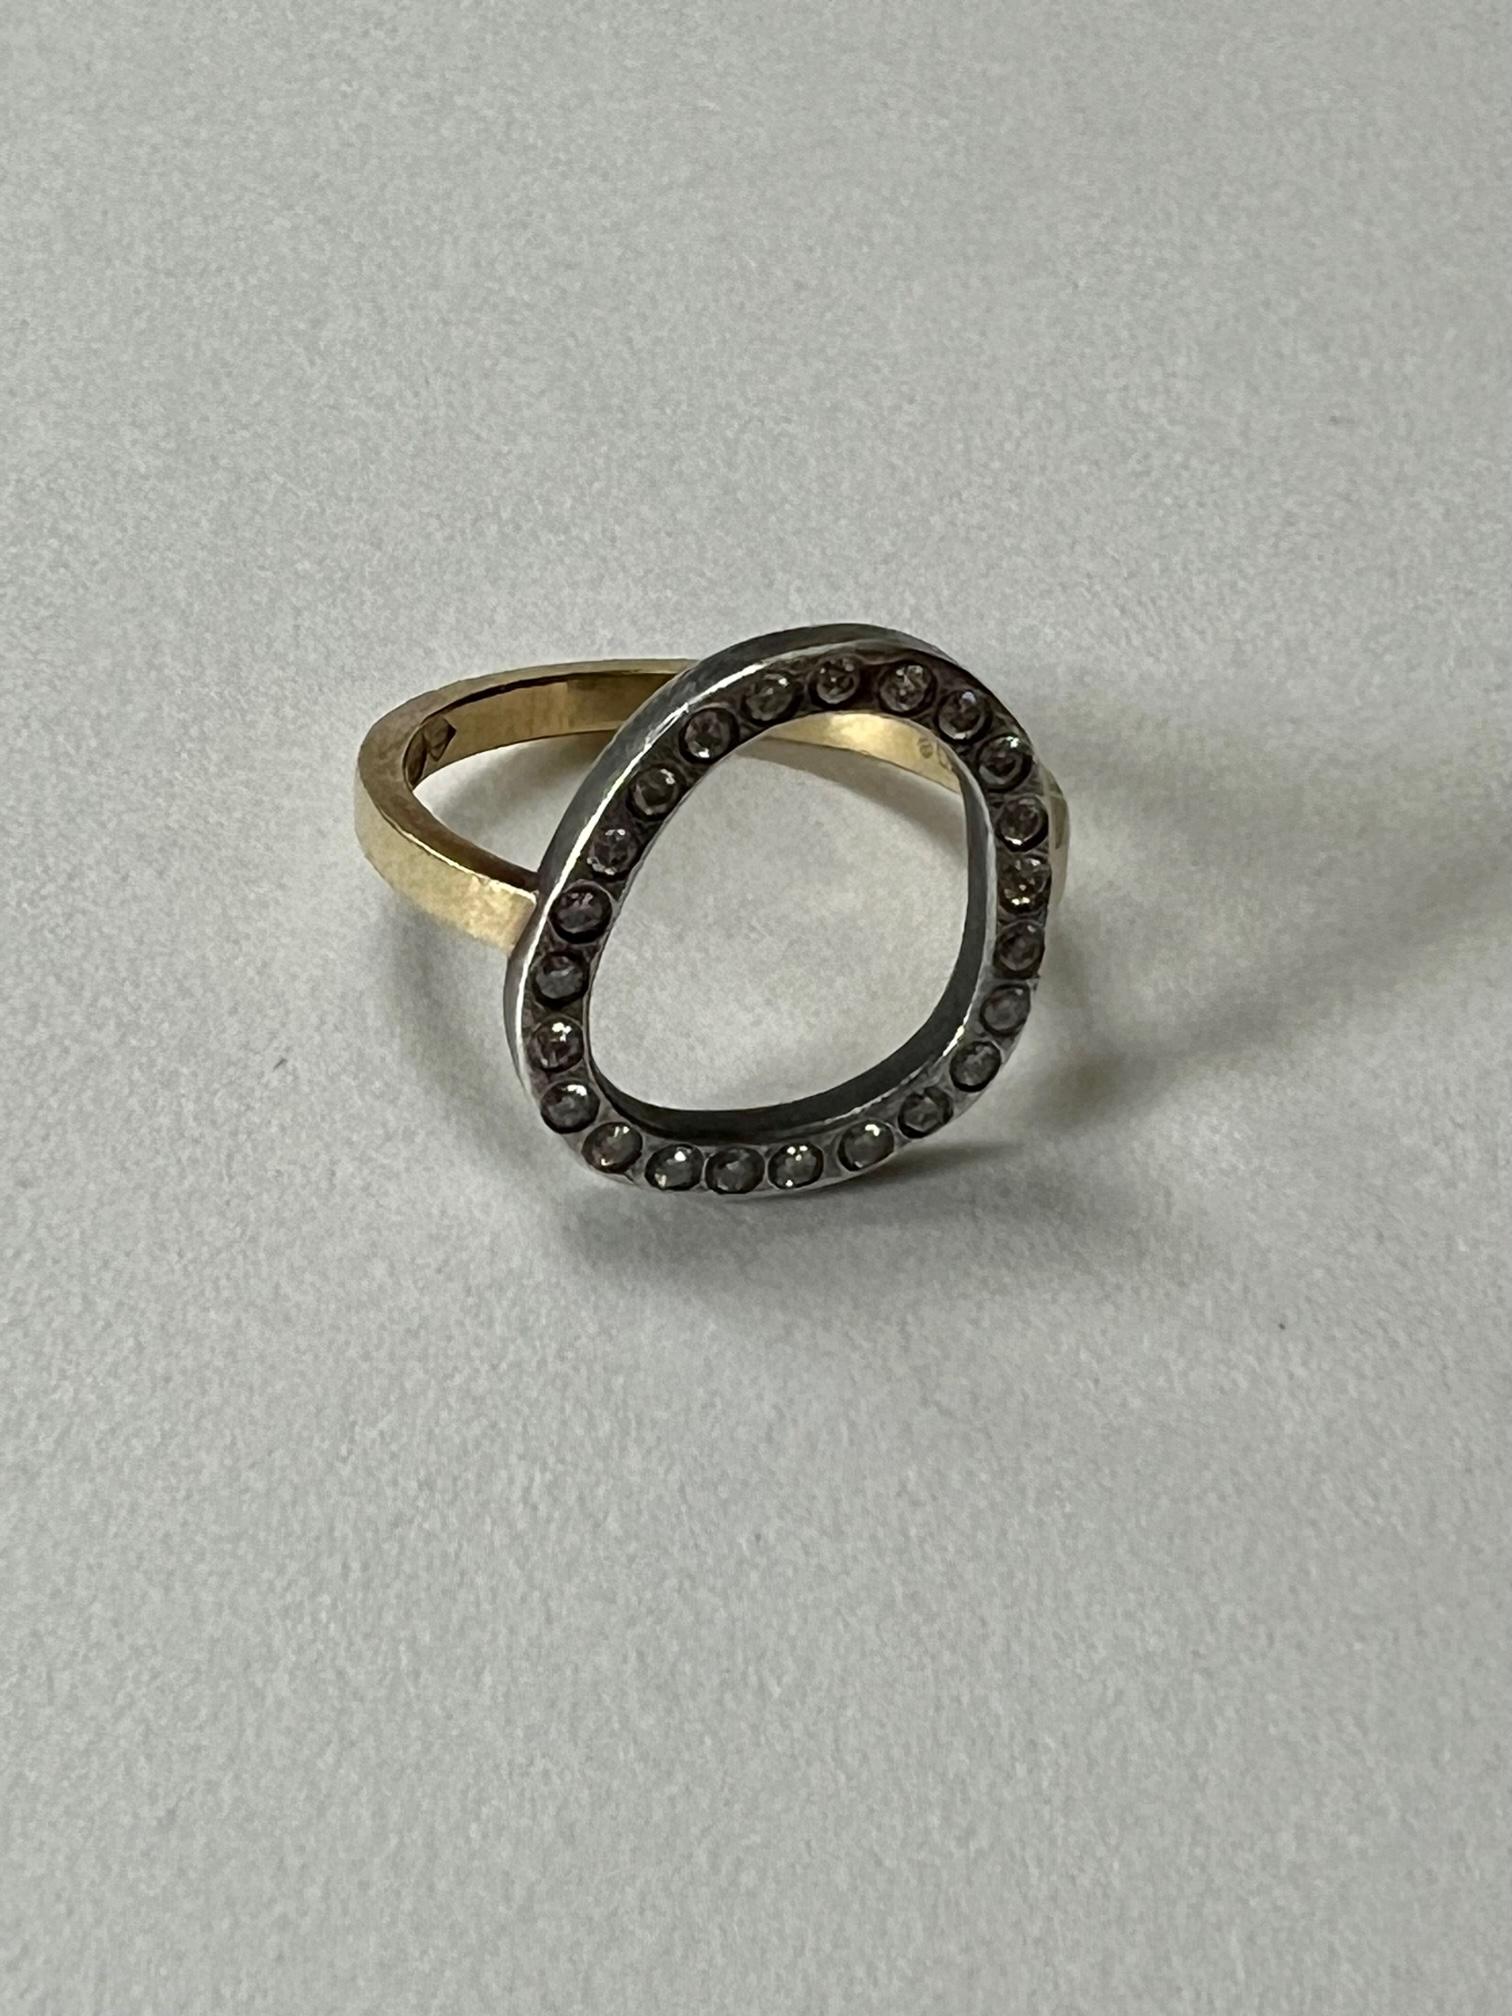 Todd Reed White Diamond Gold And Silver Open Frame Ring.

White Brilliant cut diamonds flush set in sterling silver halo on top of an 18k gold band. The halo has a dark patina finish to it.  If purchased and desired we are happy to refurbish and